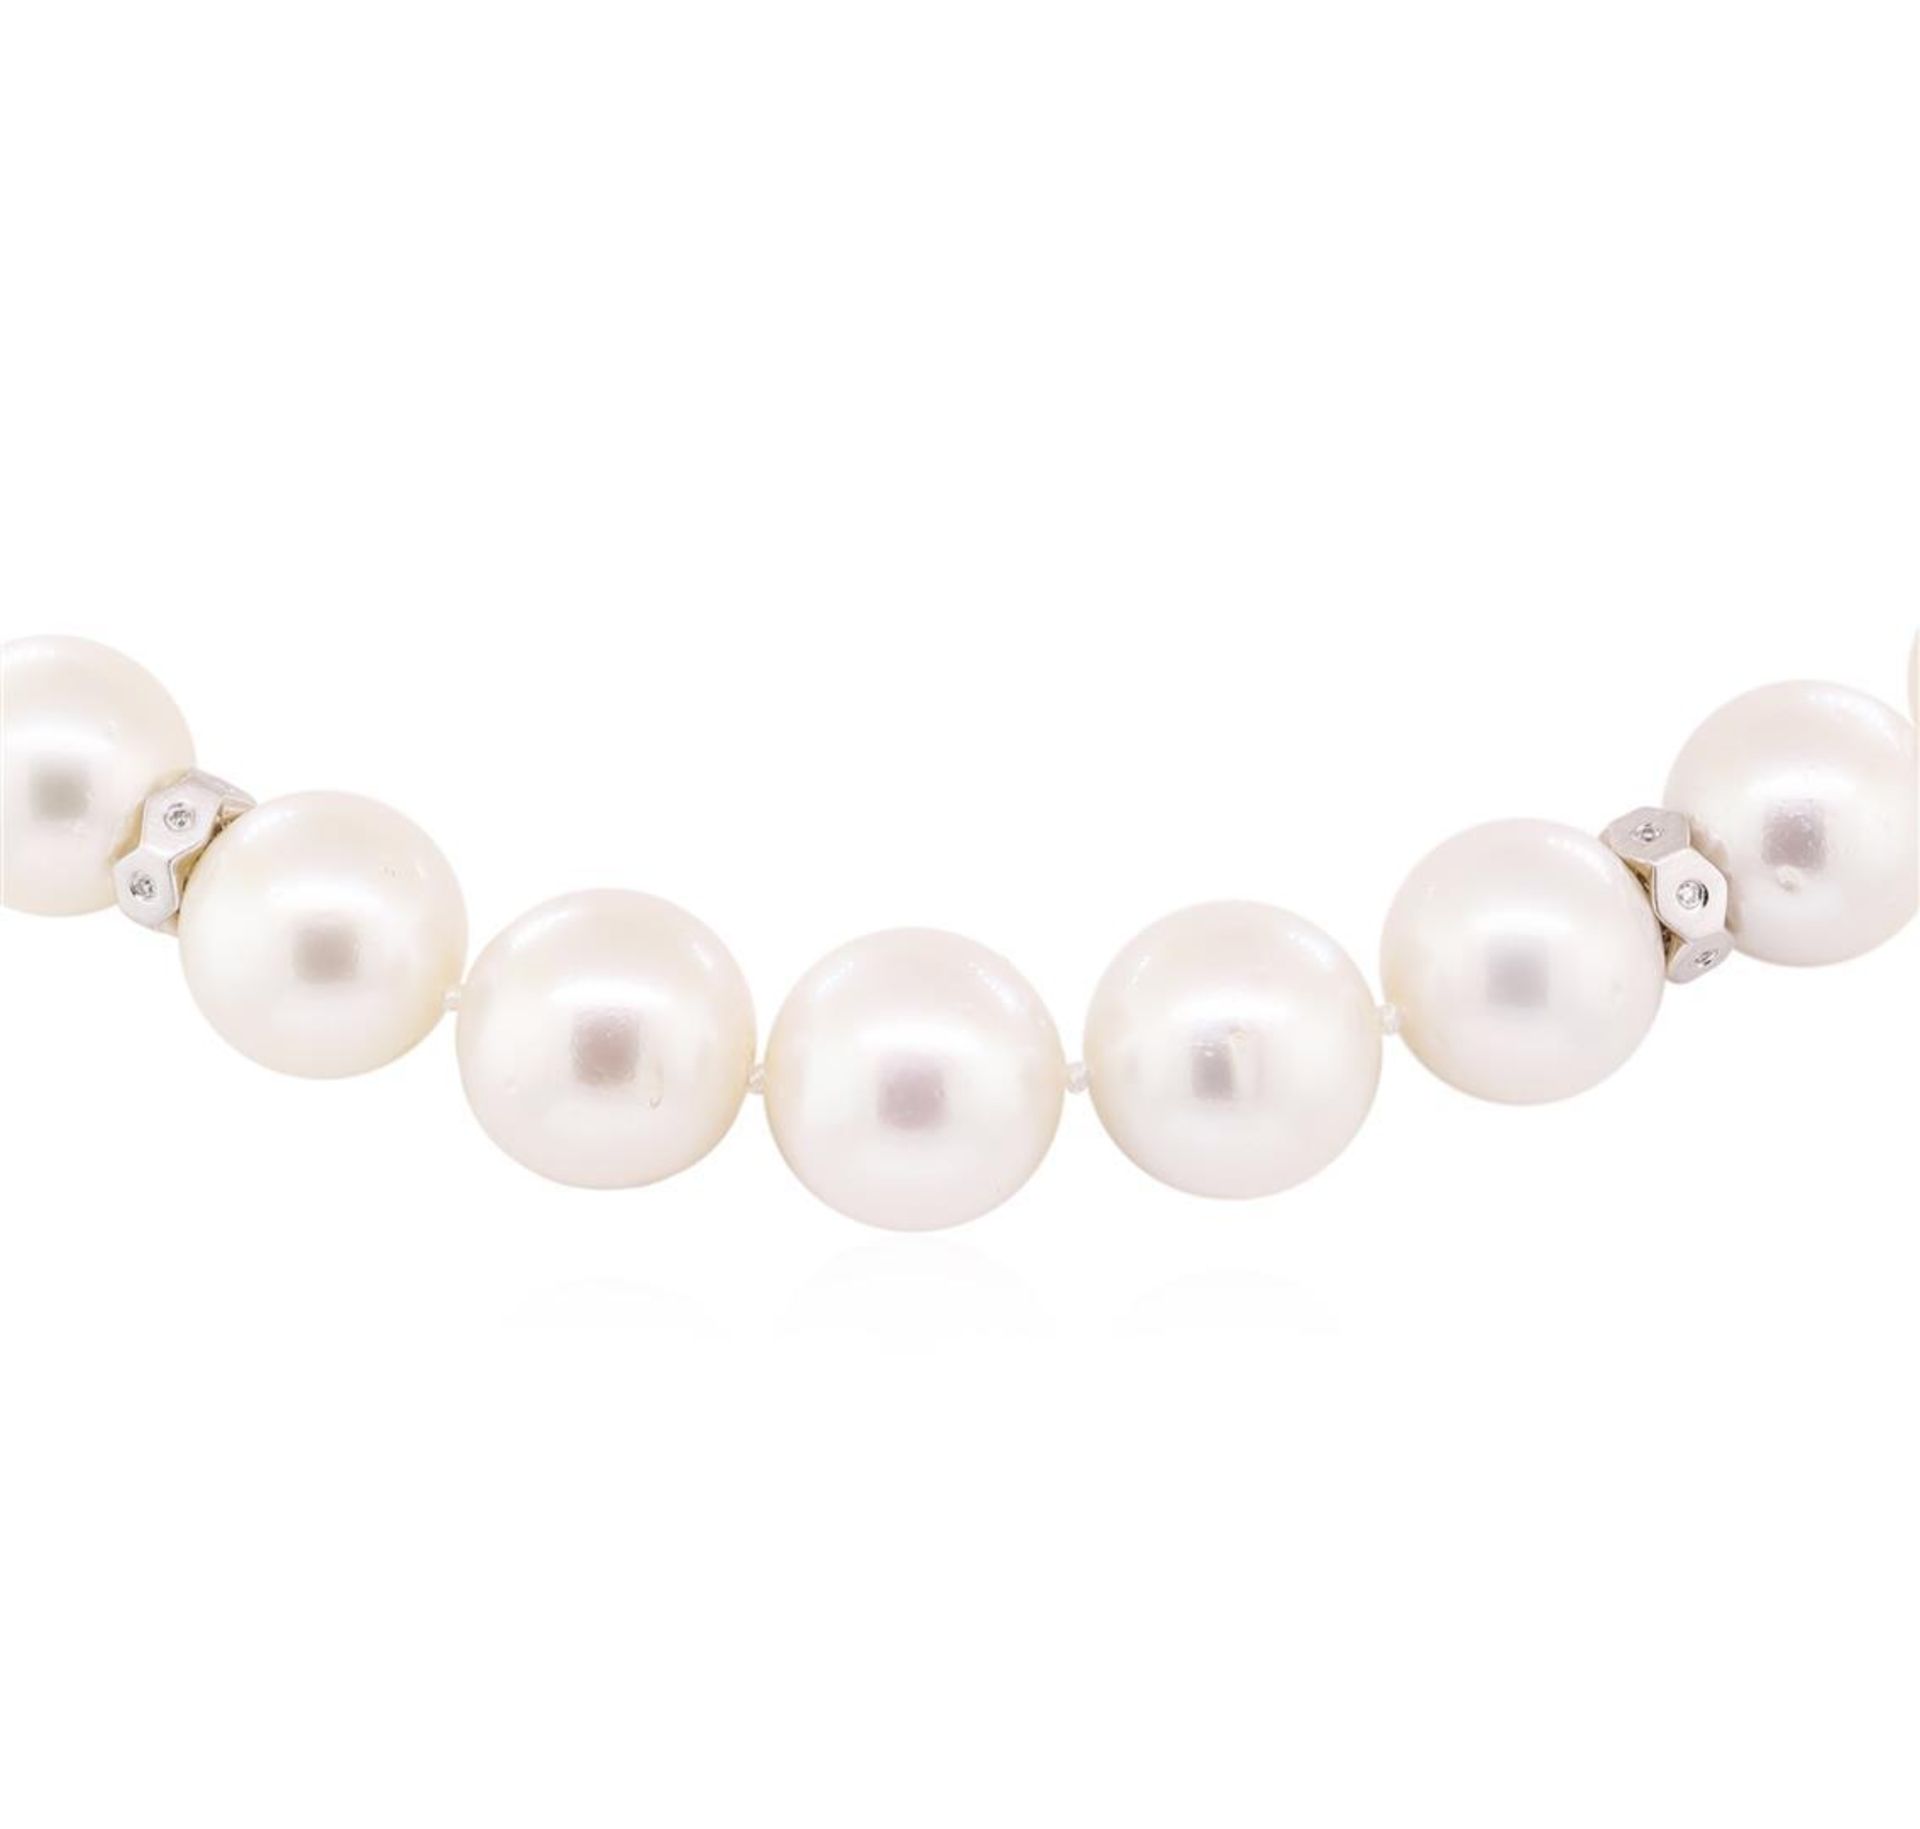 0.71 ctw Diamond and South Sea Pearl Necklace - 14KT White Gold - Image 2 of 4